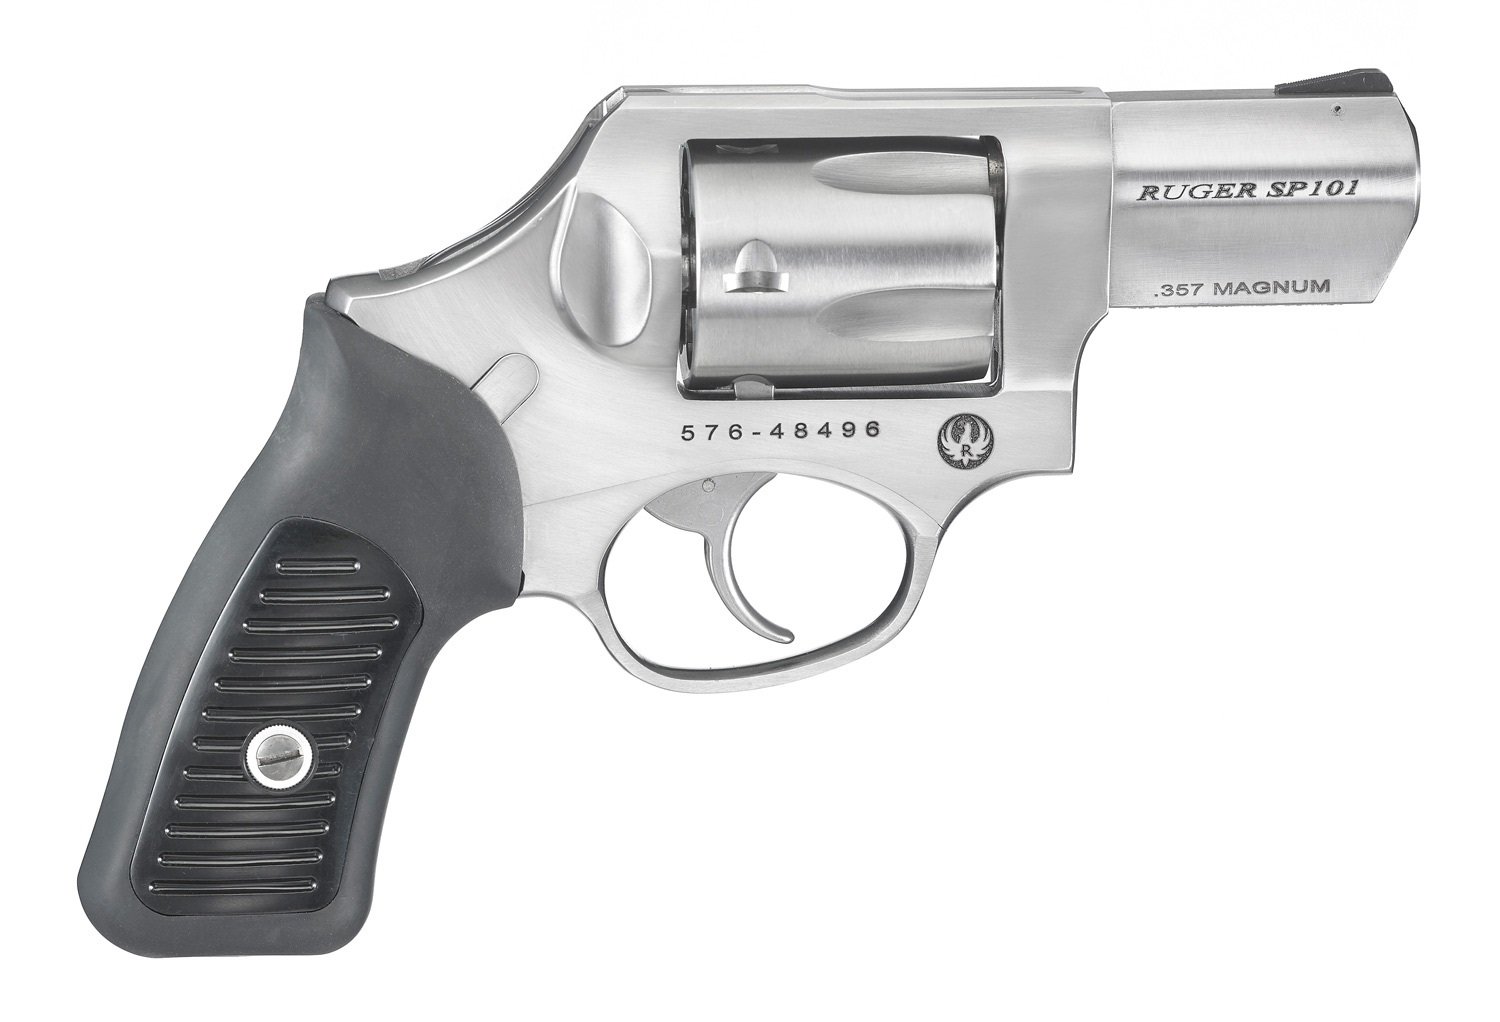 Meet Ruger's SP101 Revolver: The Ideal Gun for Self-Defense? | The ...